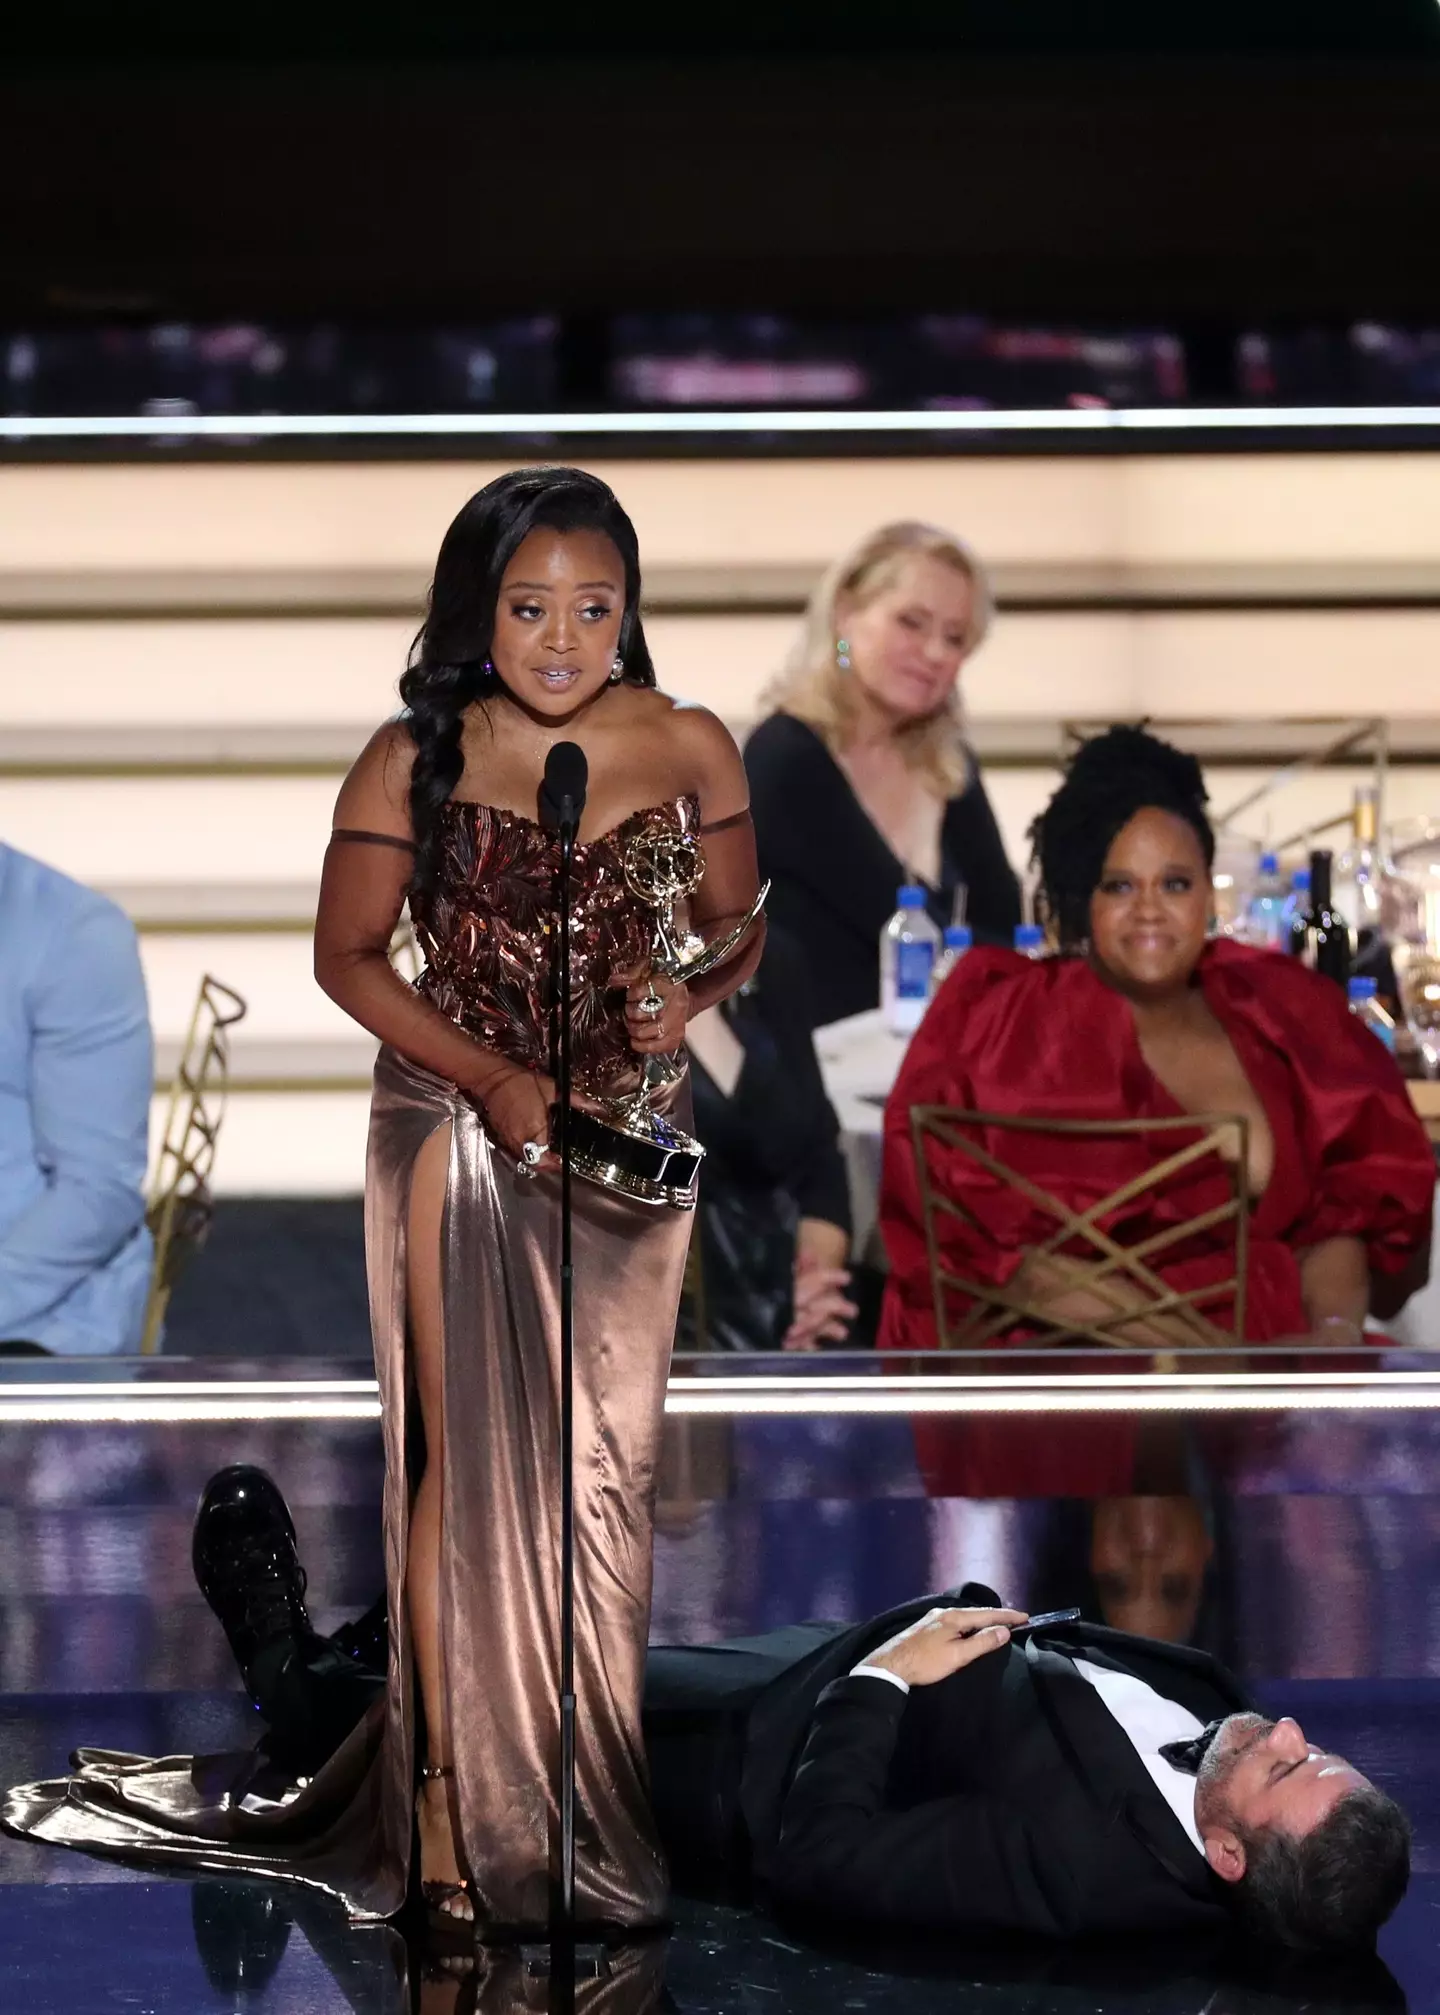 Quinta Brunson accepting her award with Jimmy Kimmel laying by her feet, seemingly passed out.